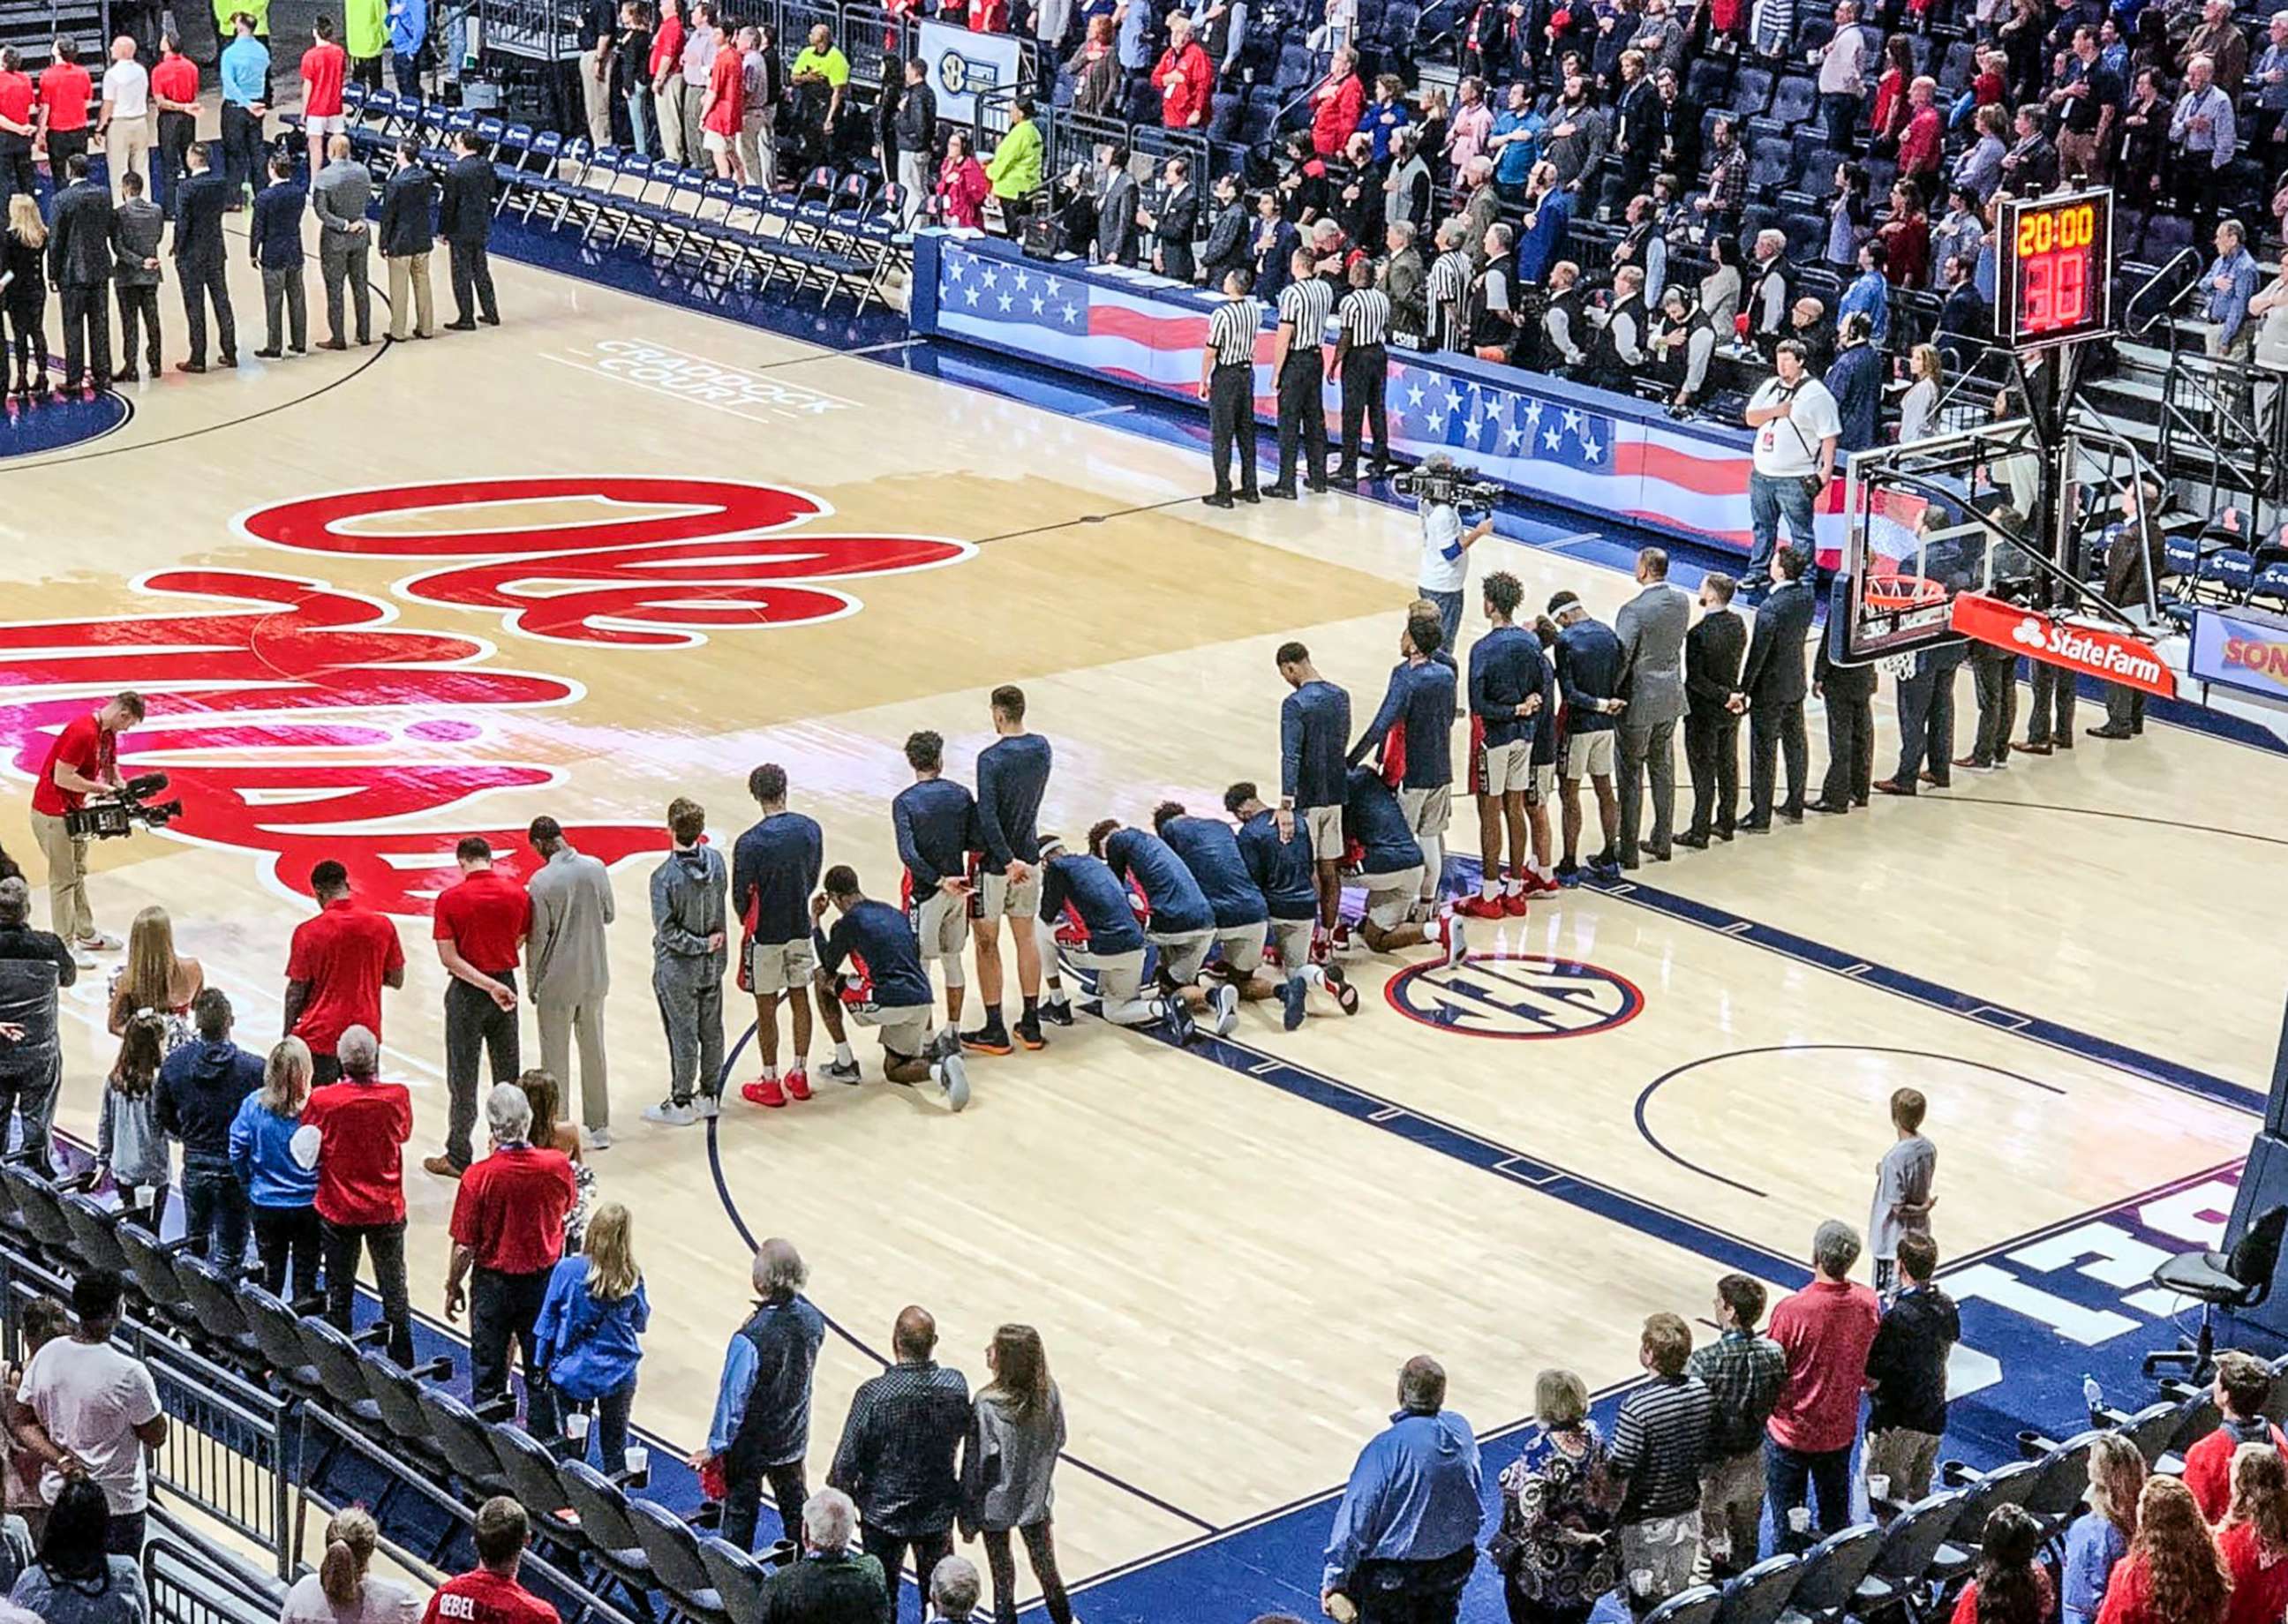 PHOTO: Six Mississippi basketball players take a knee during the national anthem before an NCAA college basketball game against Georgia in Oxford, Miss., Feb. 23, 2019.